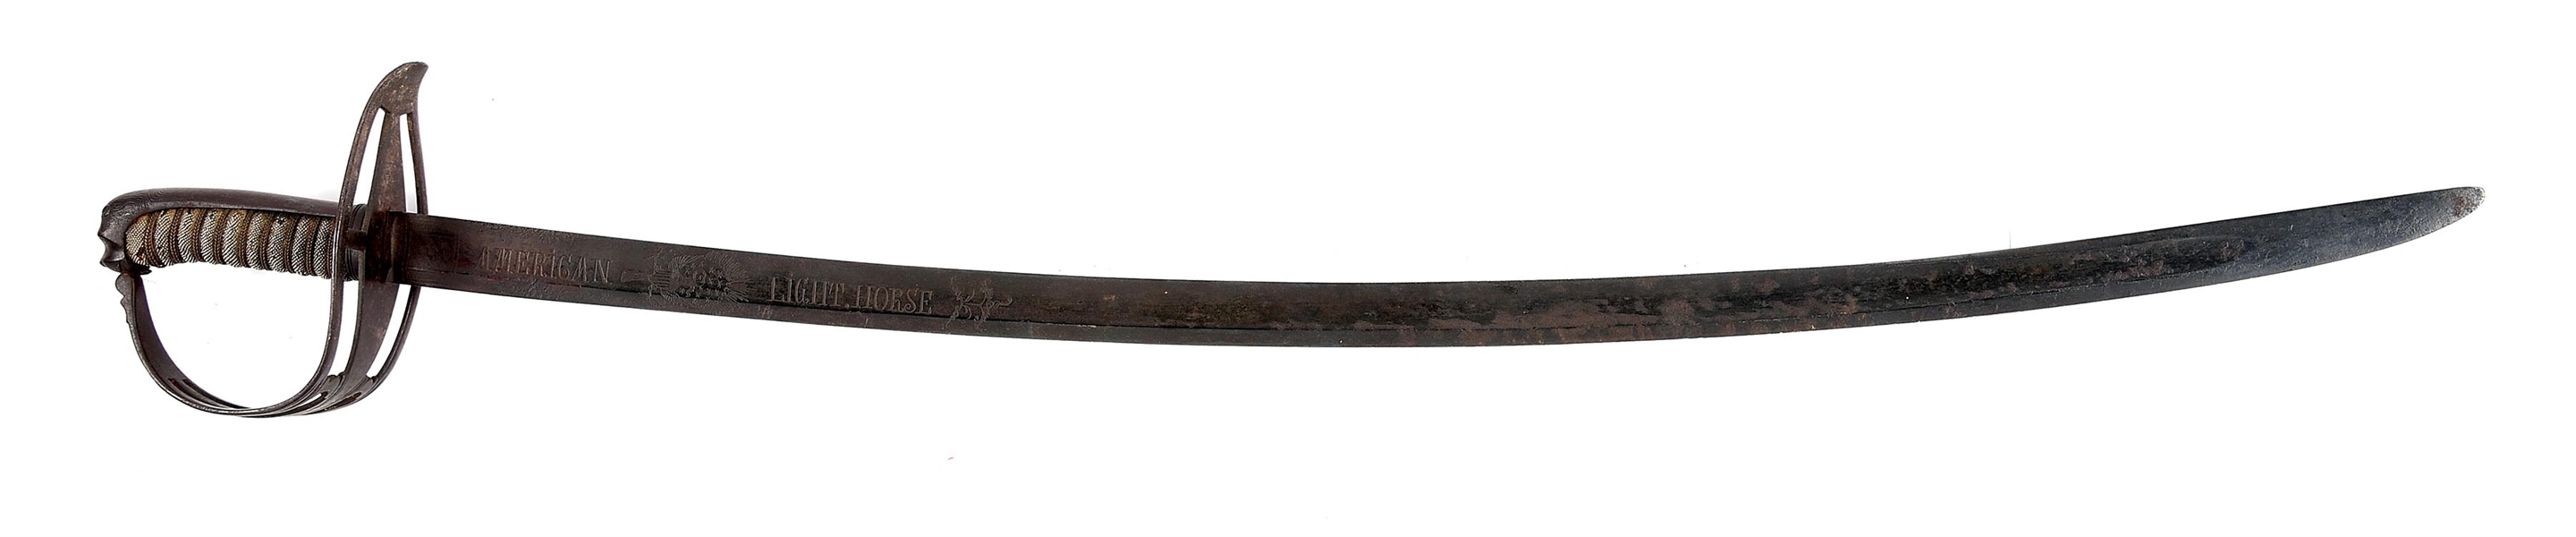 IRON MOUNTED "AMERICAN LIGHT HORSE" INSCRIBED CAVALRY SABER.